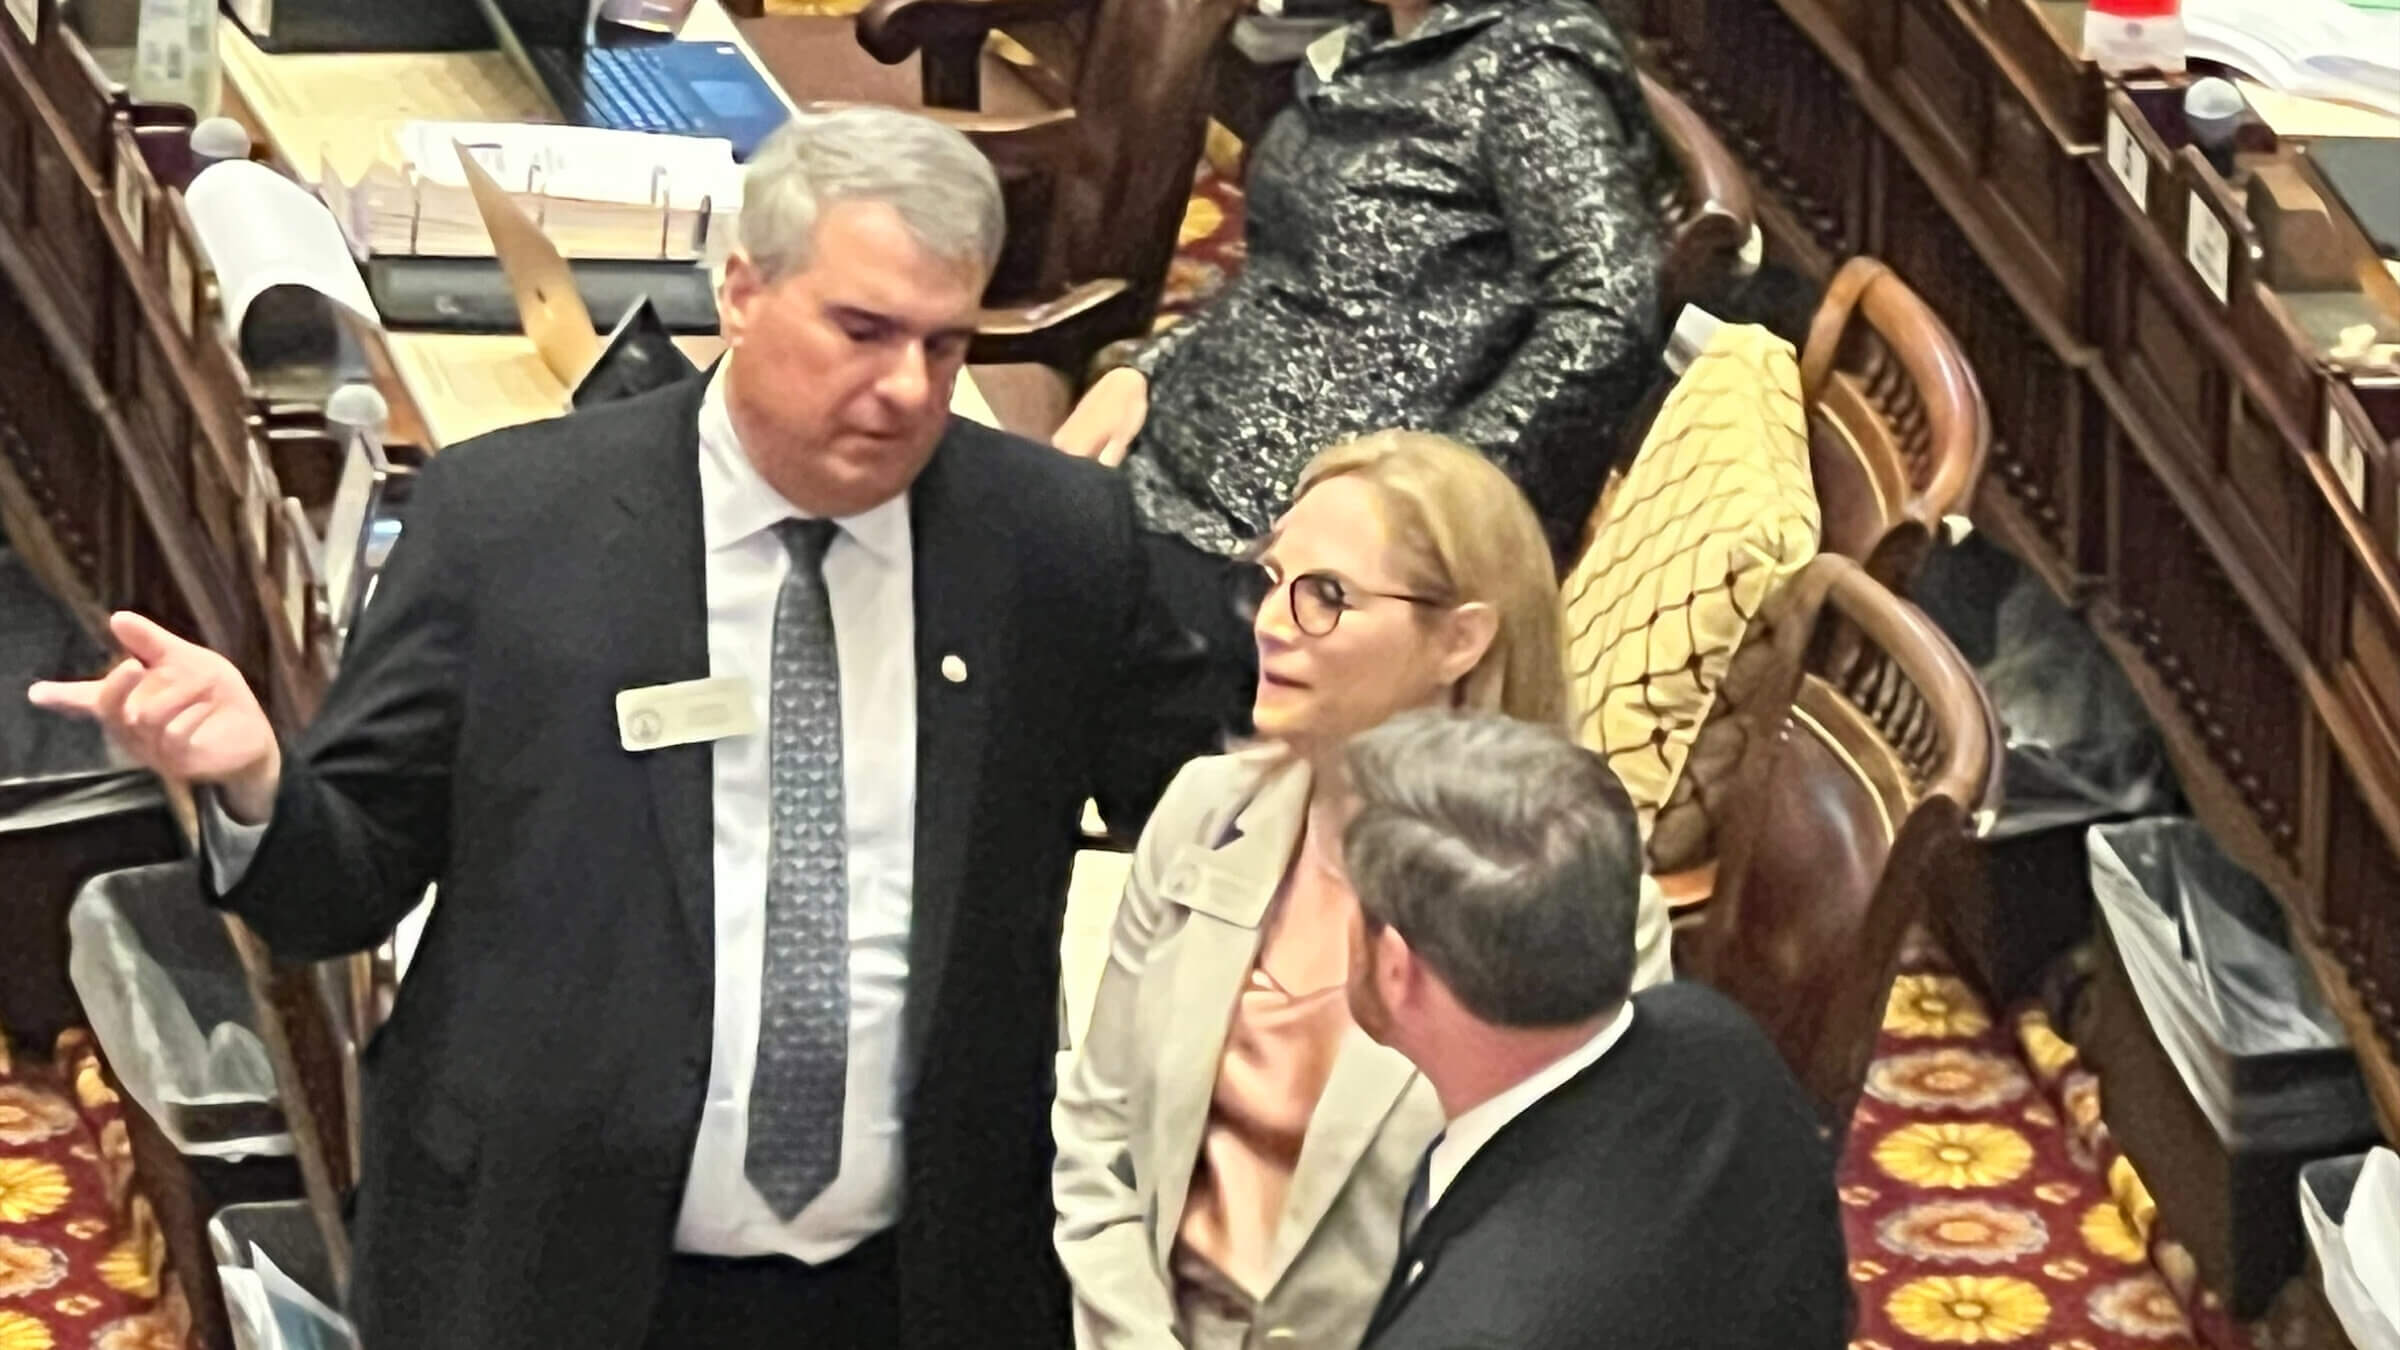 Democrat Esther Panitch (<i>center</i>), Georgia's only Jewish legislator, stands with Republican John Carson (<i>left</i>). The two co-sponsored a bill defining antisemitism that recently was approved by the state House of Representatives. The state Senate did not vote on the bill before the legislative session ended. 